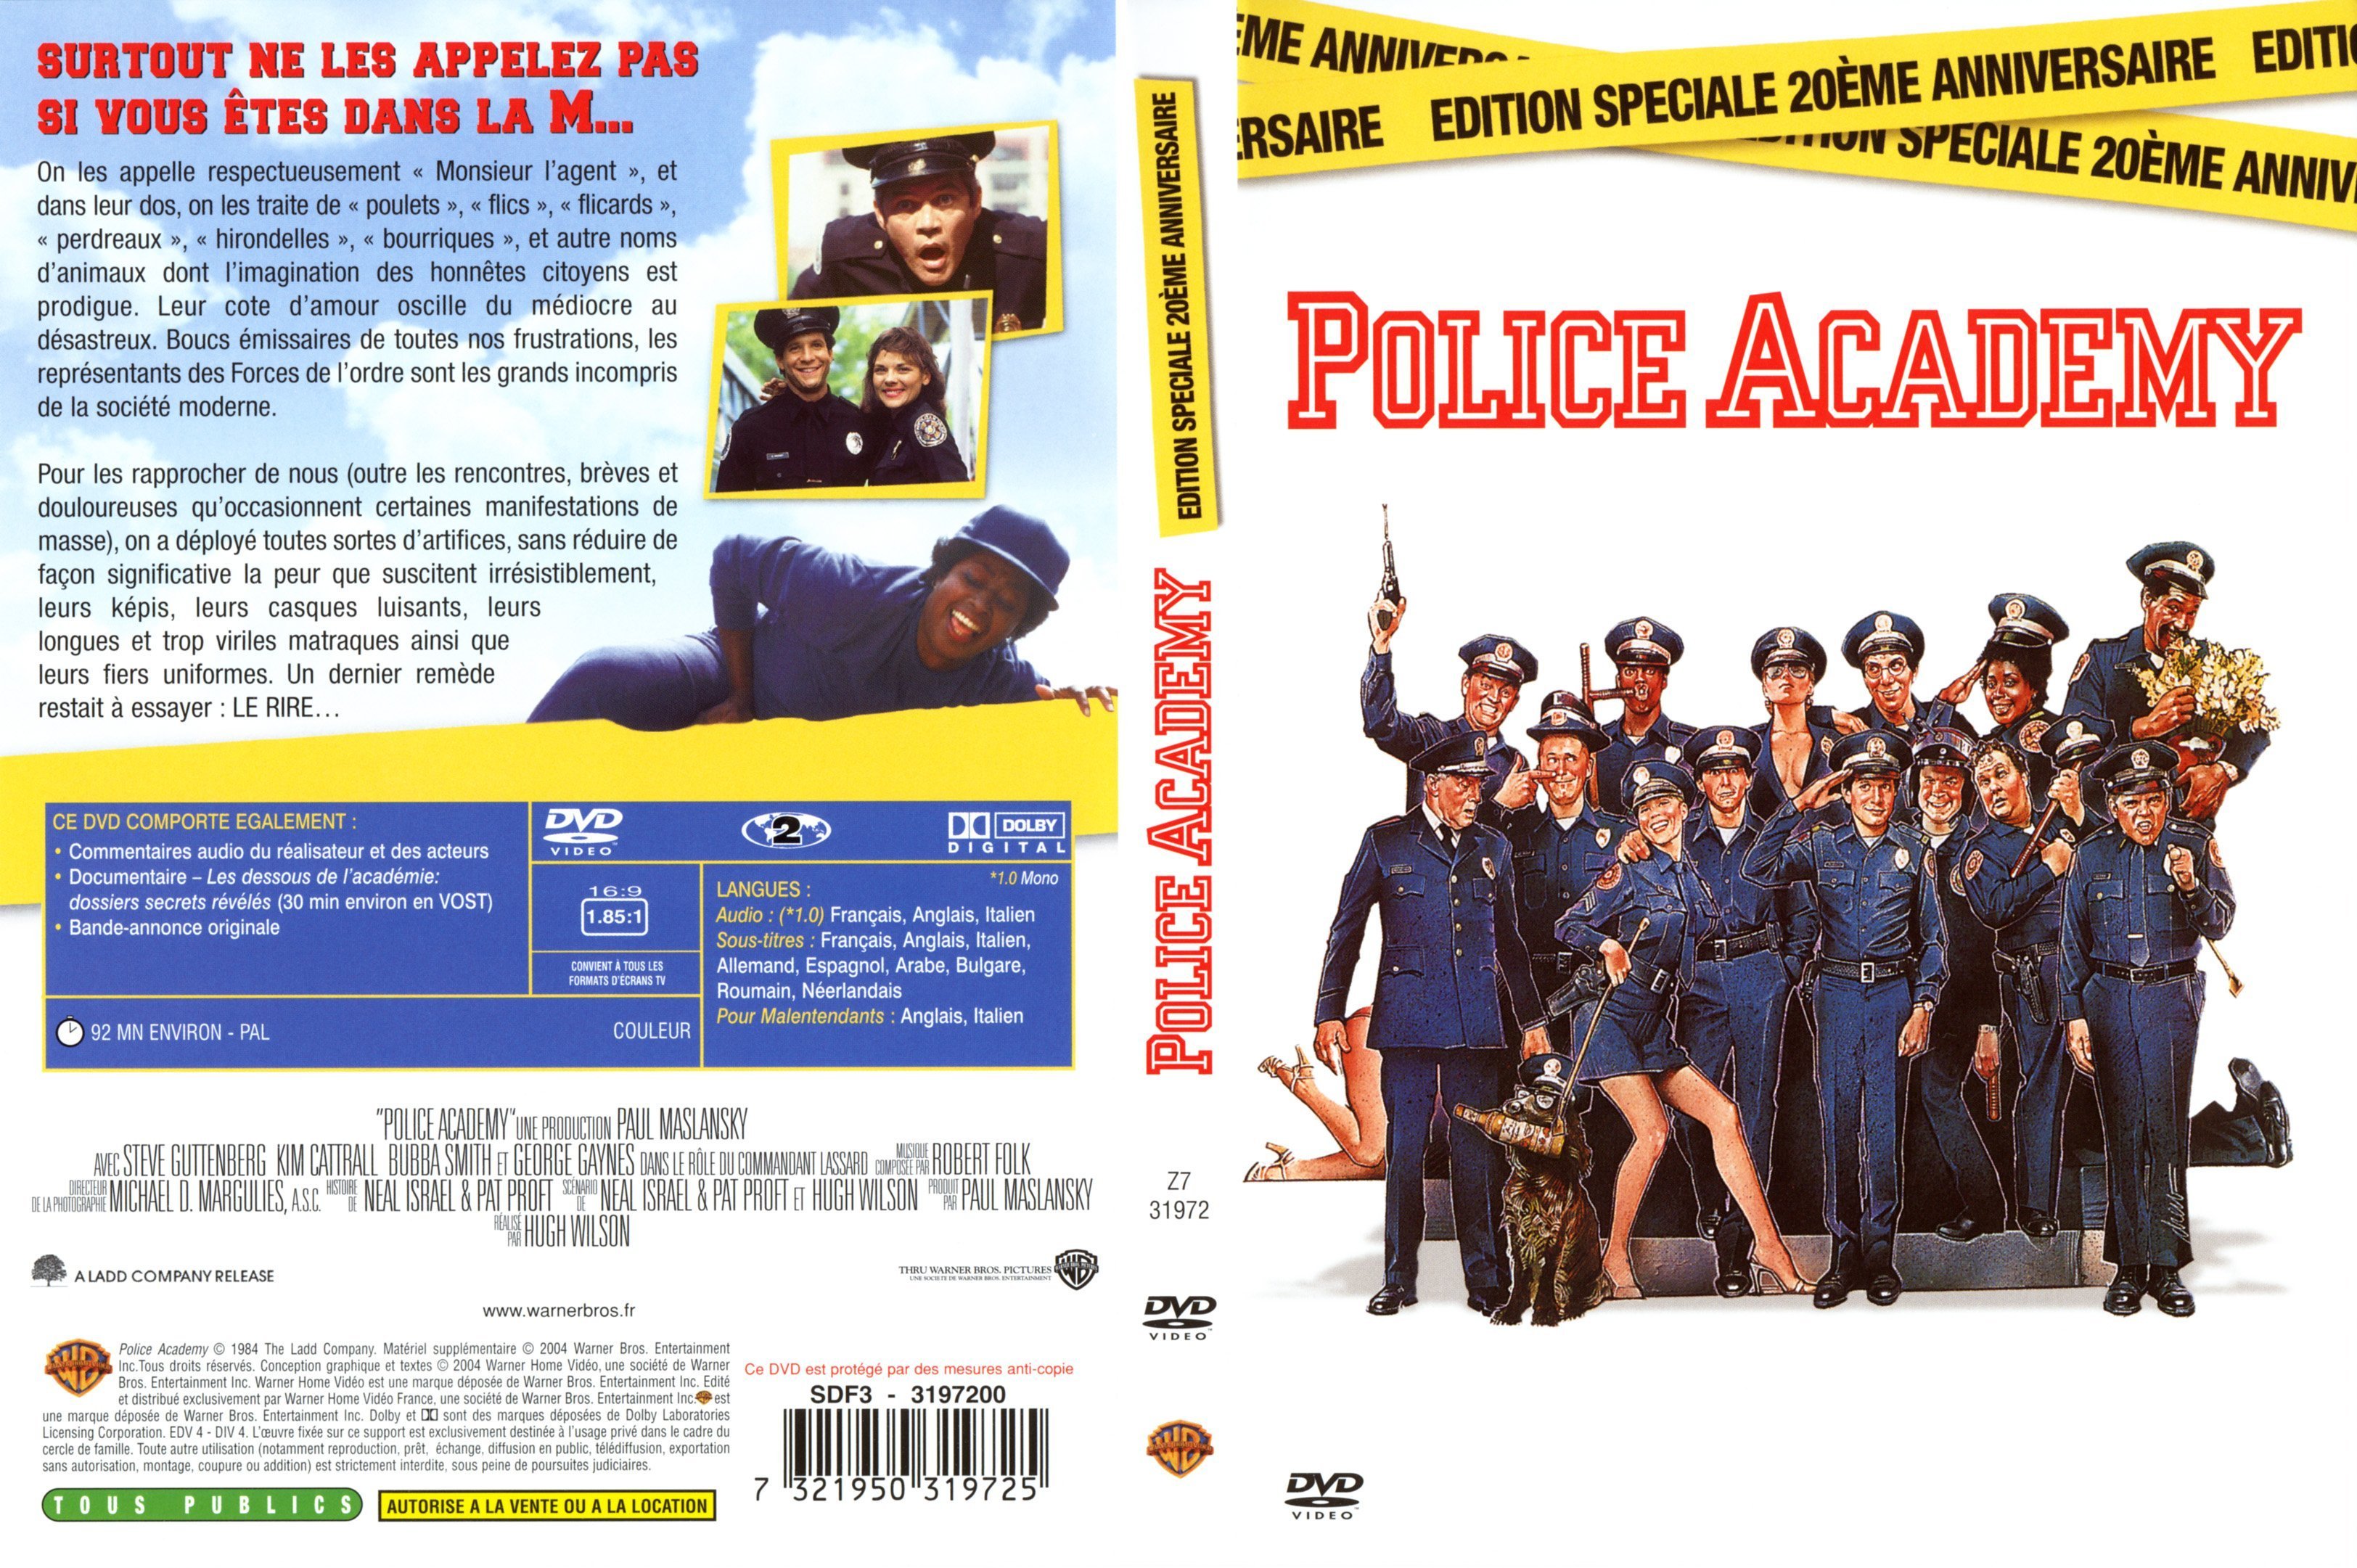 Jaquette DVD Police academy